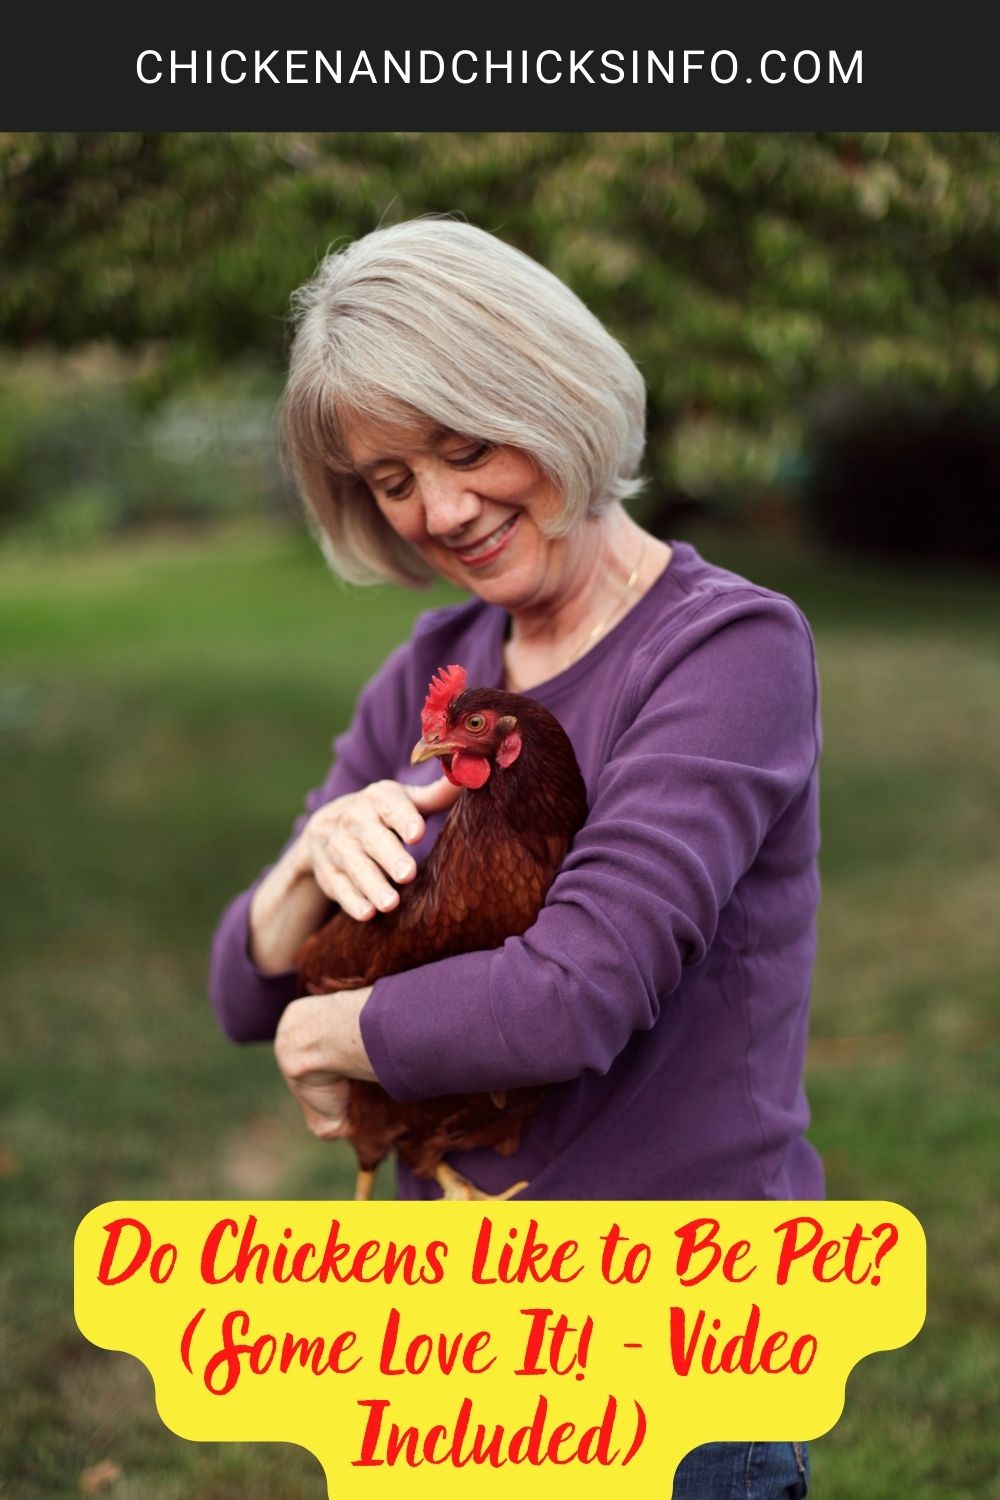 Do Chickens Like to Be Pet? (Some Love It! - Video Included) poster.
